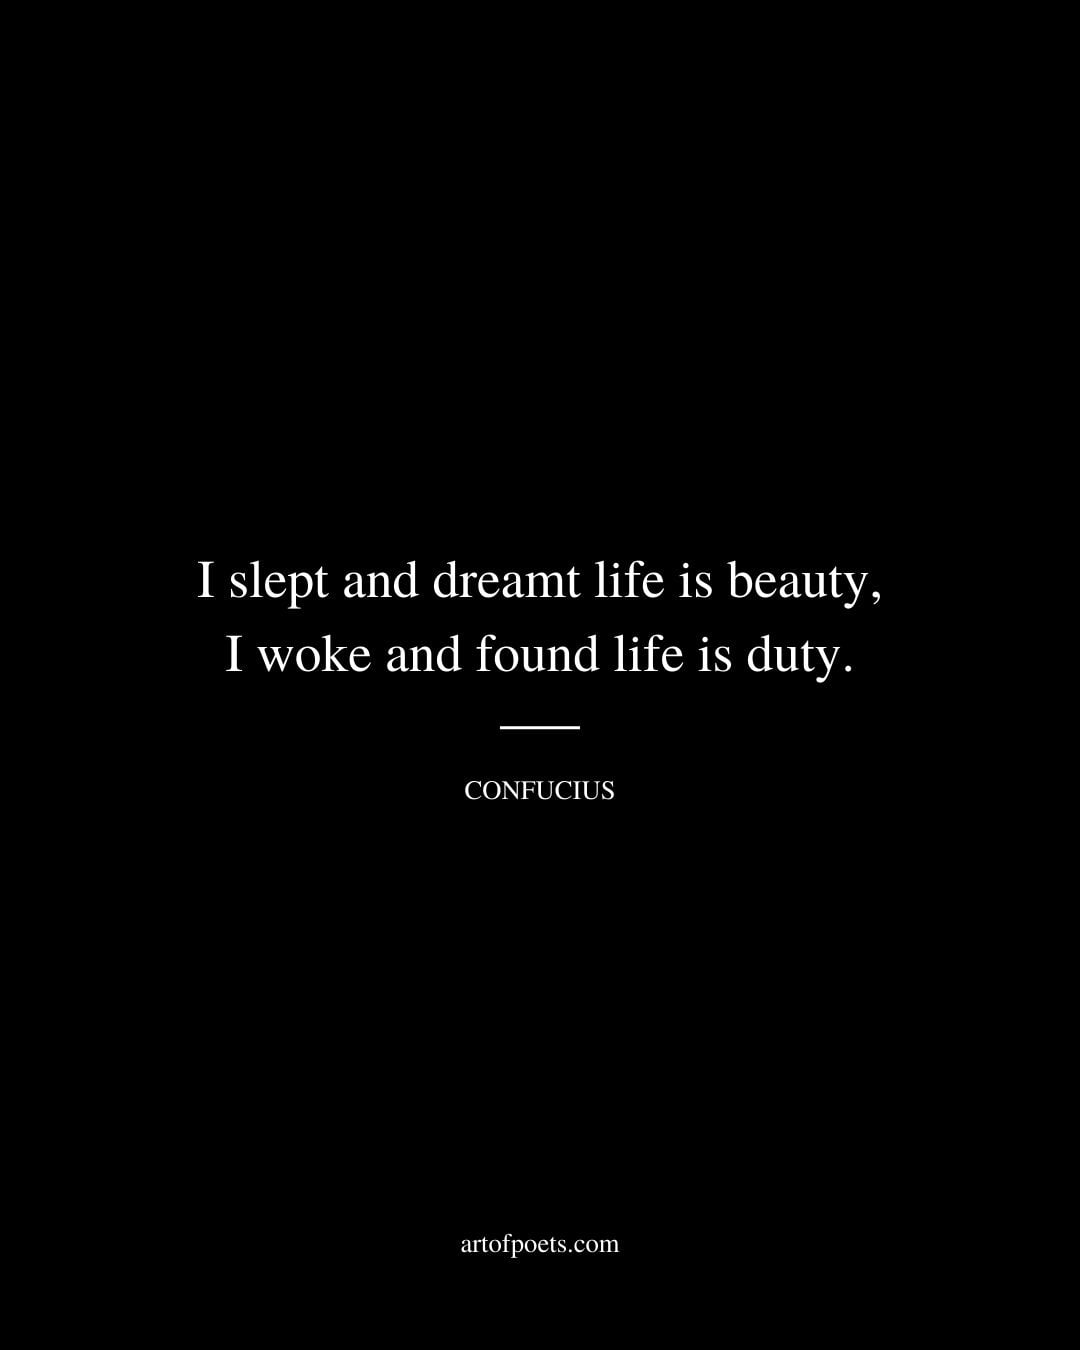 I slept and dreamt life is beauty I woke and found life is duty